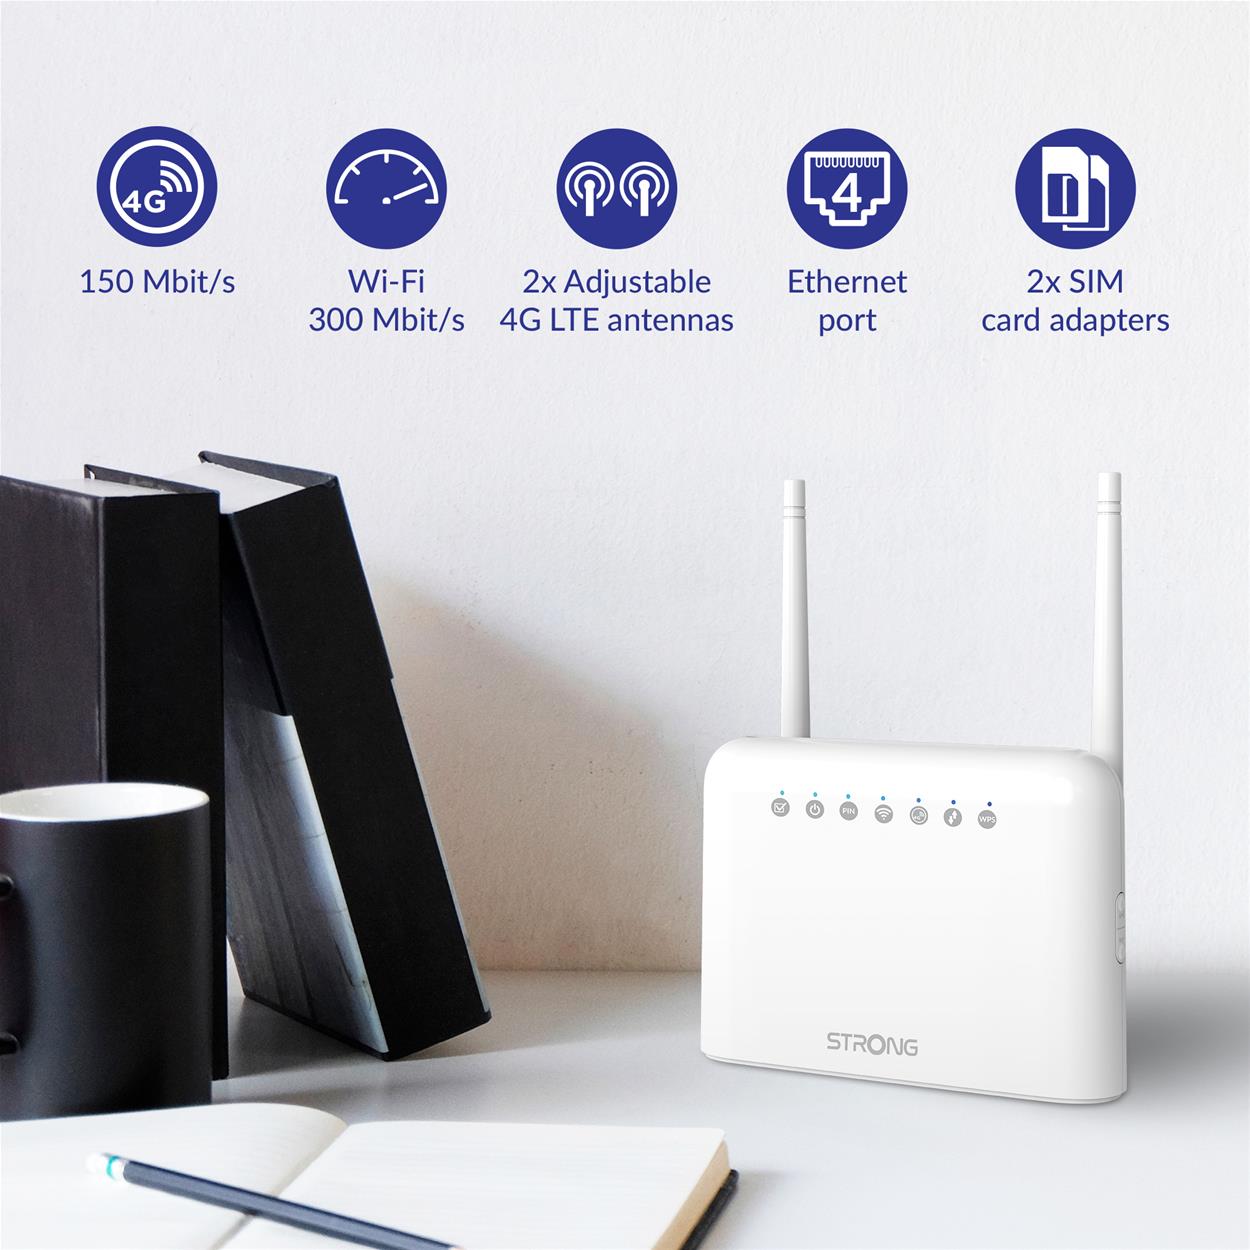 STRONG 4GROUTER350 Wi-Fi router